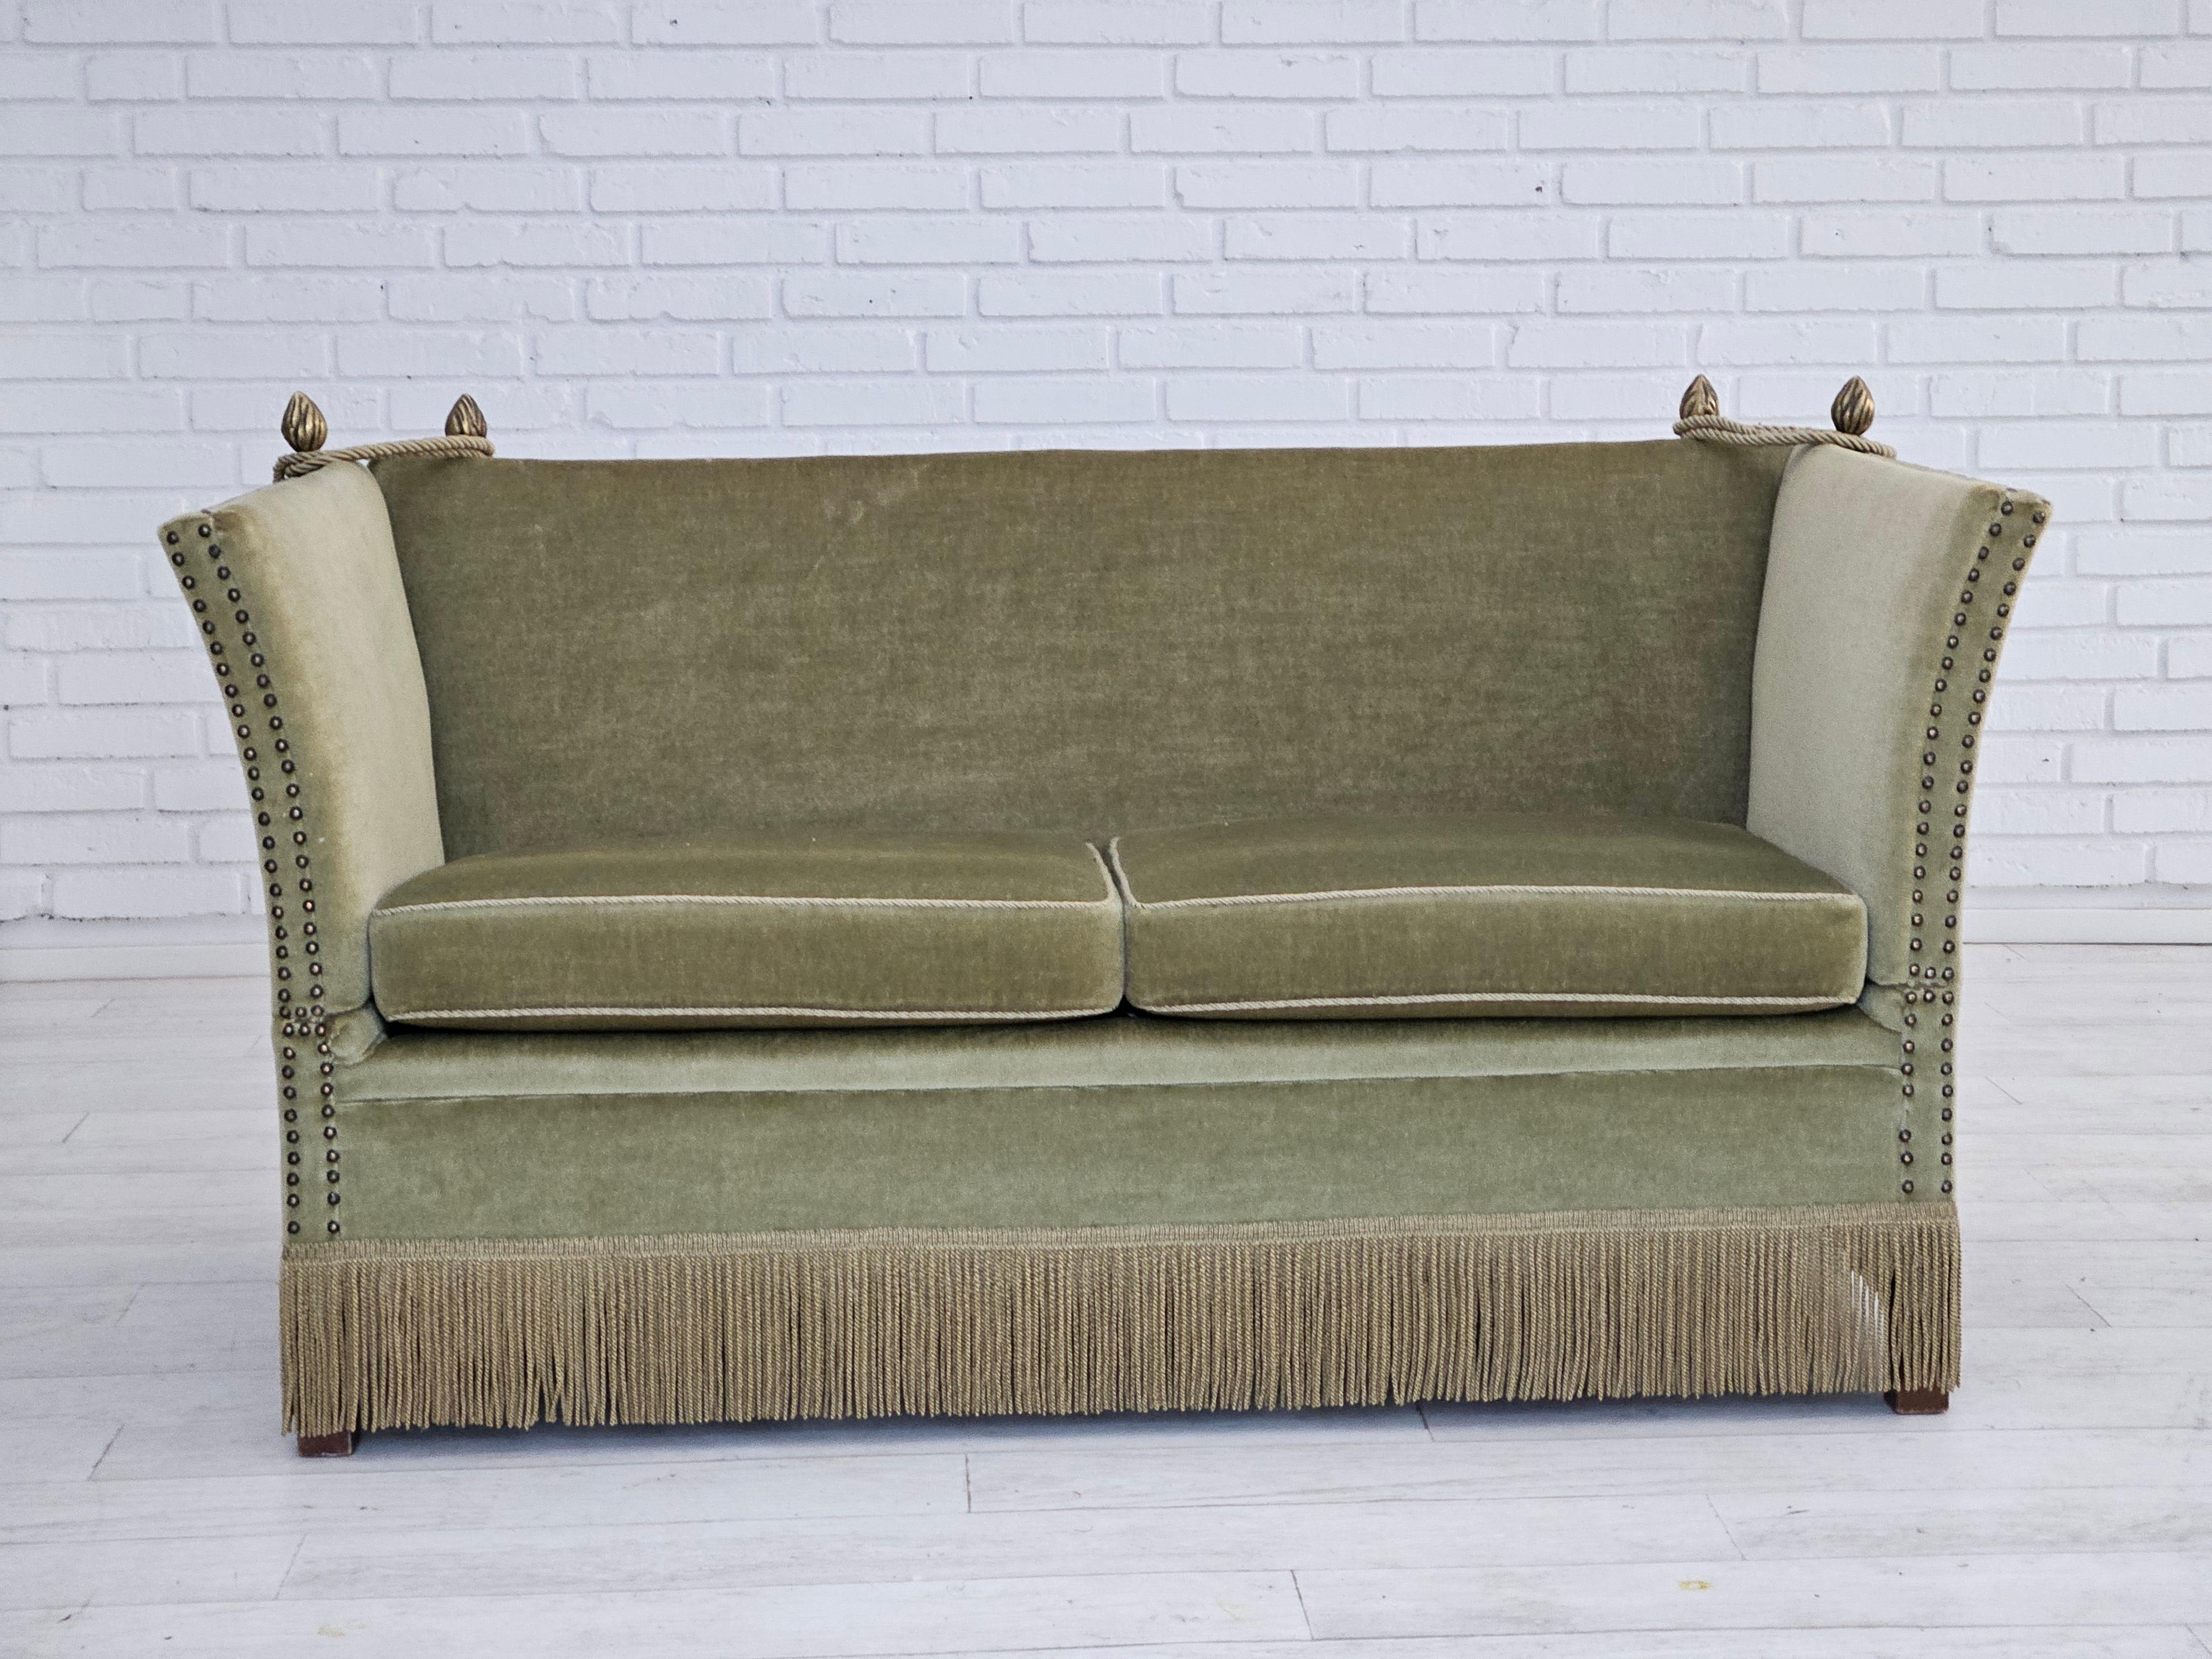 1950s, Danish drop-arm 2 seater sofa in original very good condition: no smells and no stains. Light green velour. Removable seat cushions. Manufactured by Danish furniture manufacturer in about 1960s. Three adjustments positions in each arm. Beech